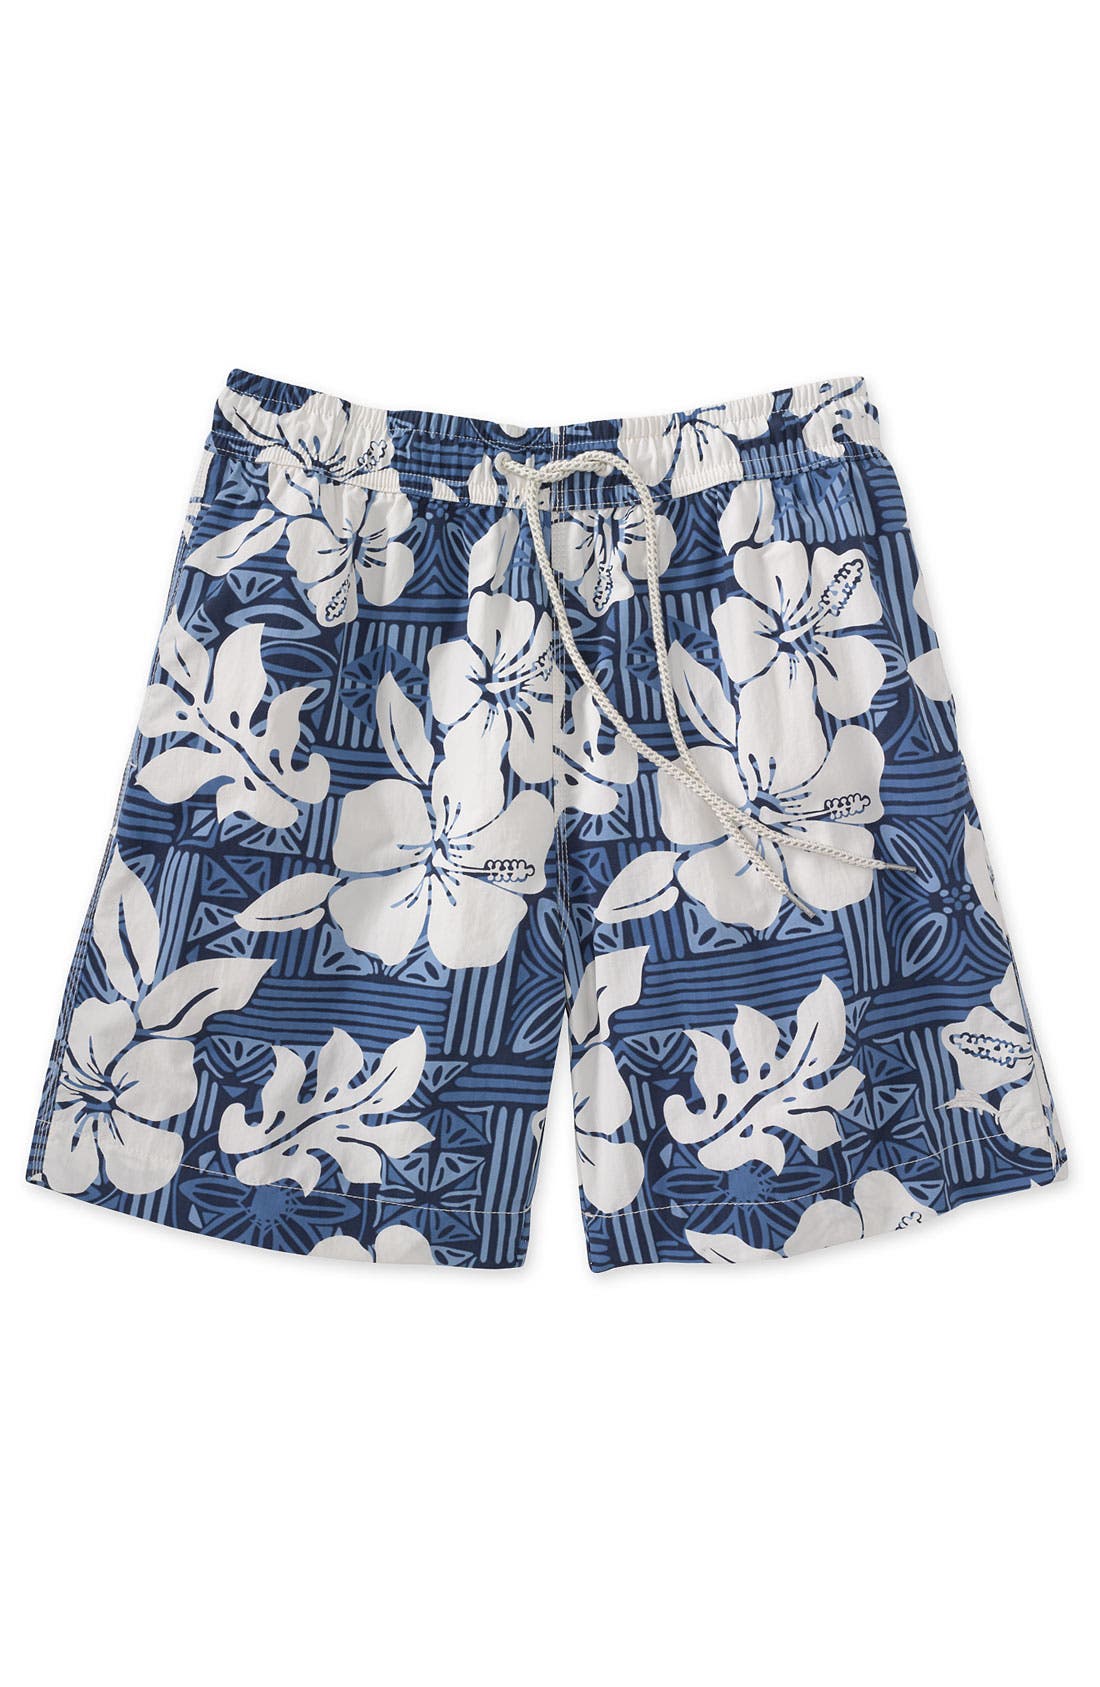 tommy bahama men's swimsuits